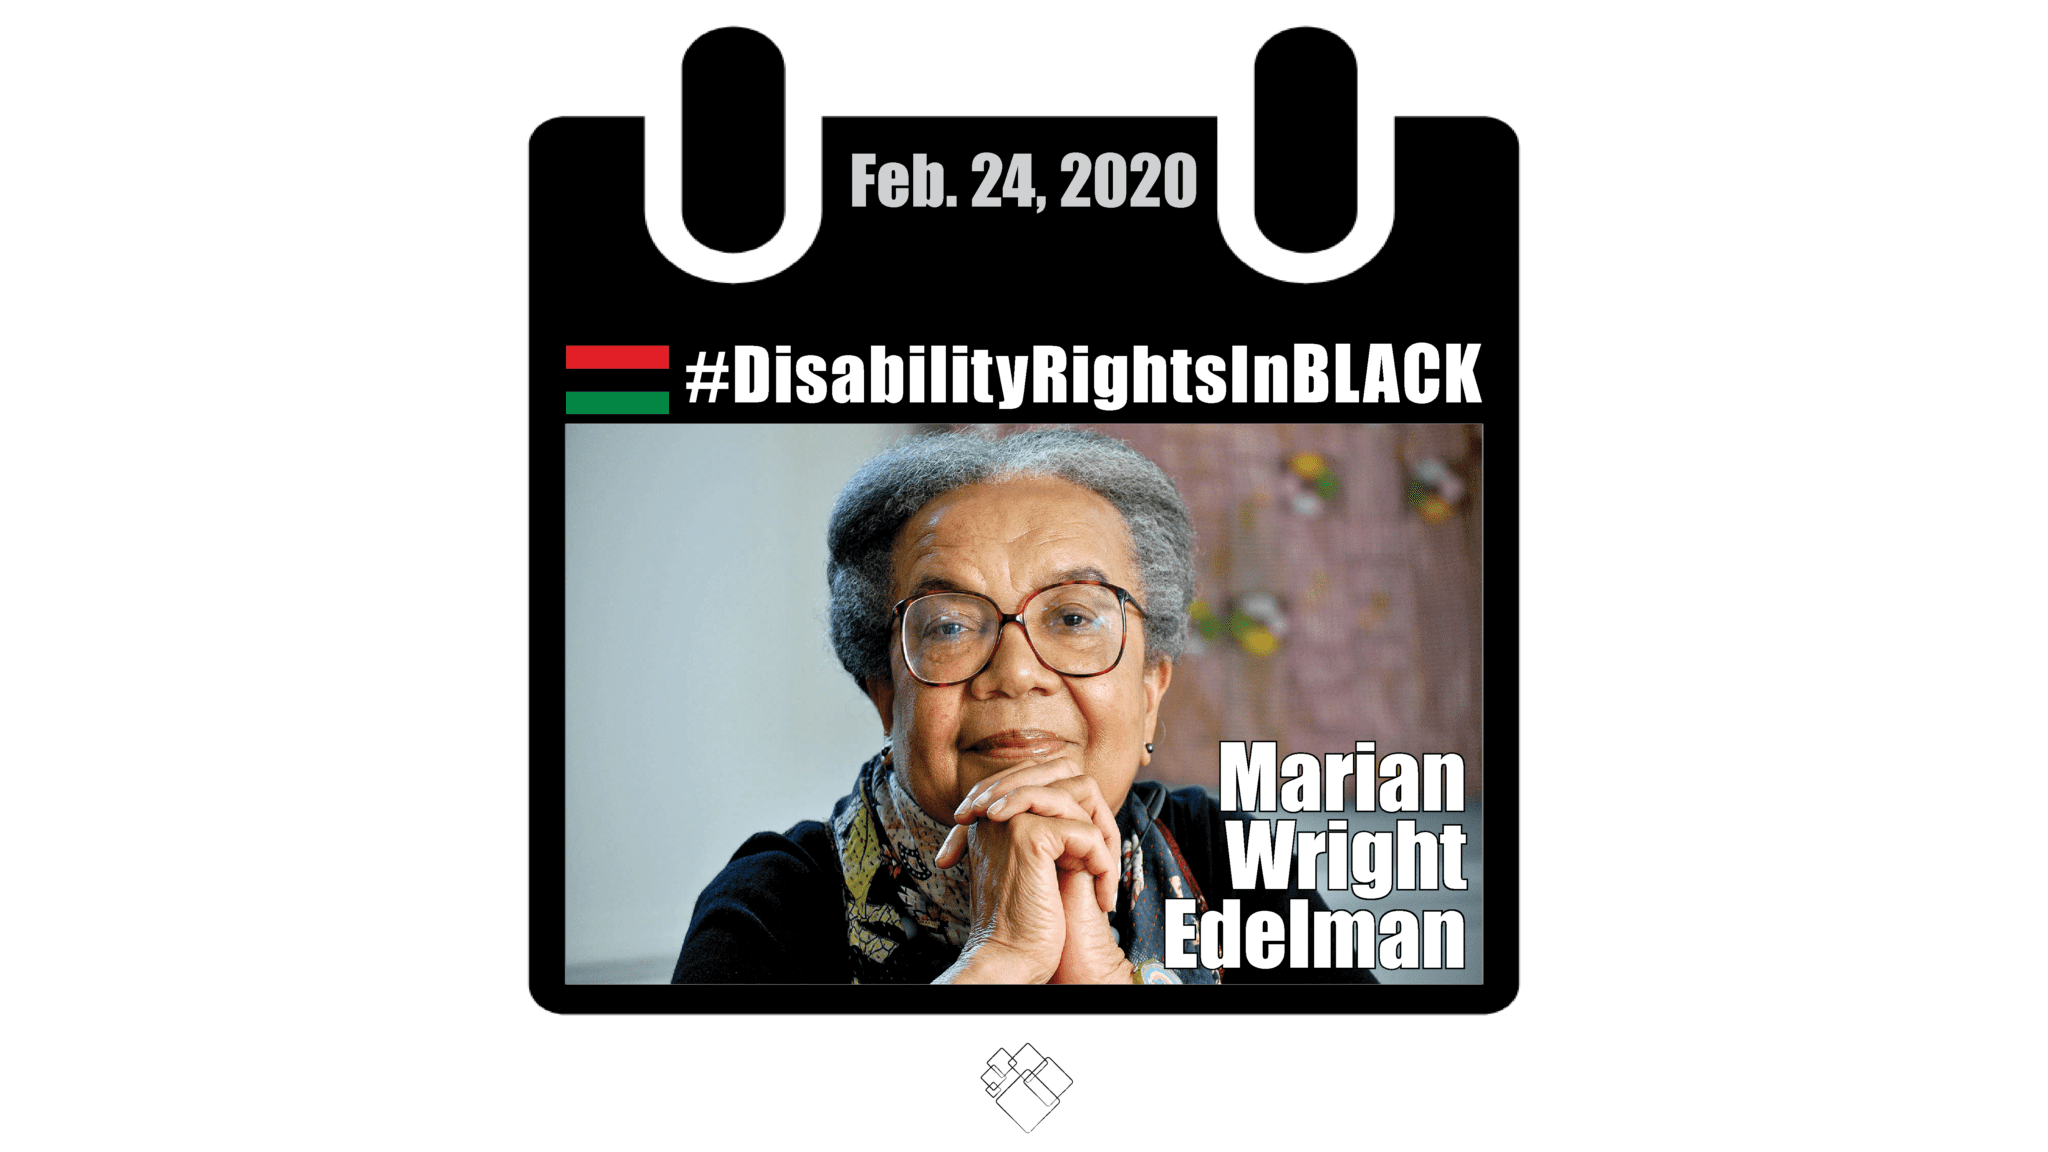 Marian clasps her hands in front of her chin and smiles at the camera. She wears framed glasses and a colorful scarf around her neck. The image of her has the Disability Rights in Black calendar style frame graphic with the hashtag for the series at the top and the date, February 24, 2020.